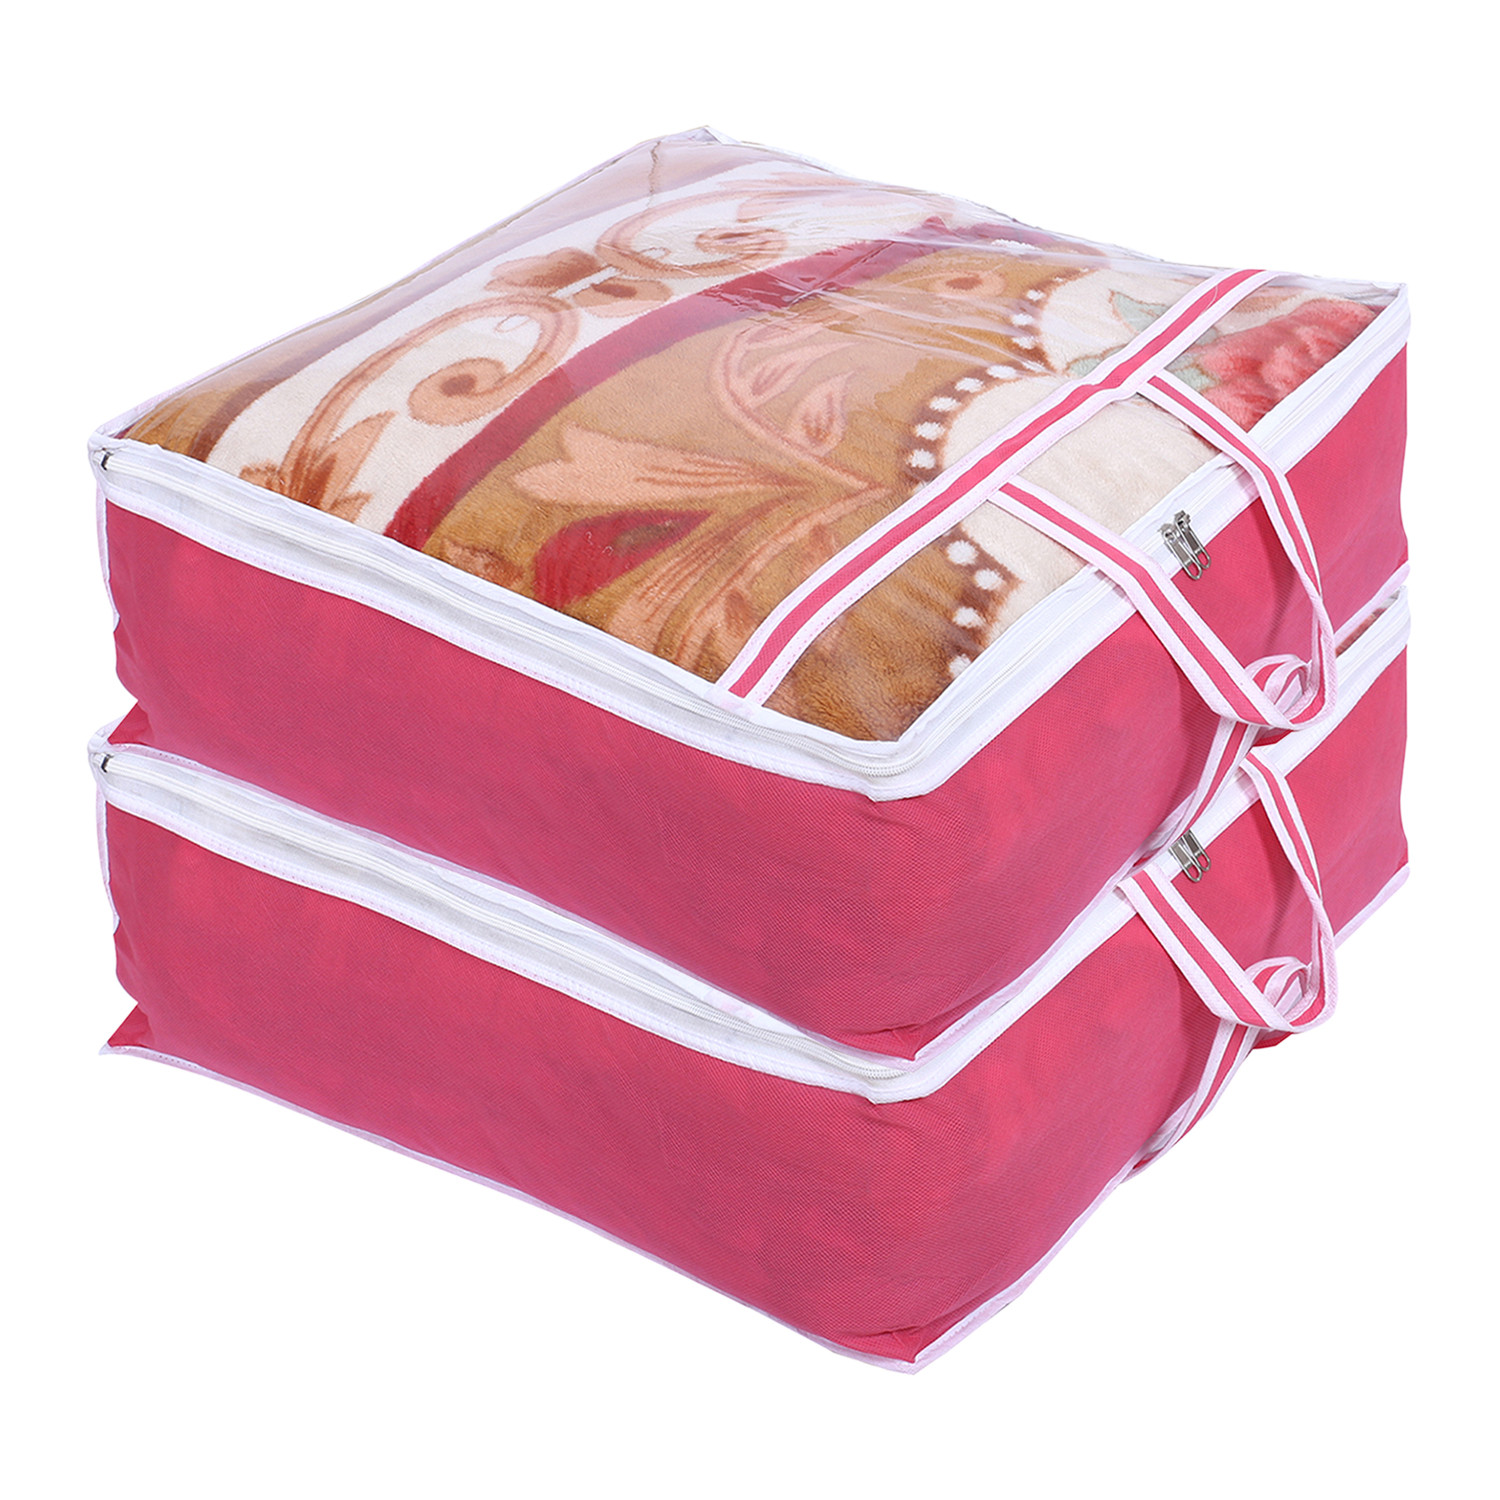 Kuber Industries Blanket Cover | Non-Woven Blanket Cover for Saree | Zipper Storage Bag for Clothes | Wardrobe Organizer with Top Transparent Window | Extra Large|Pink